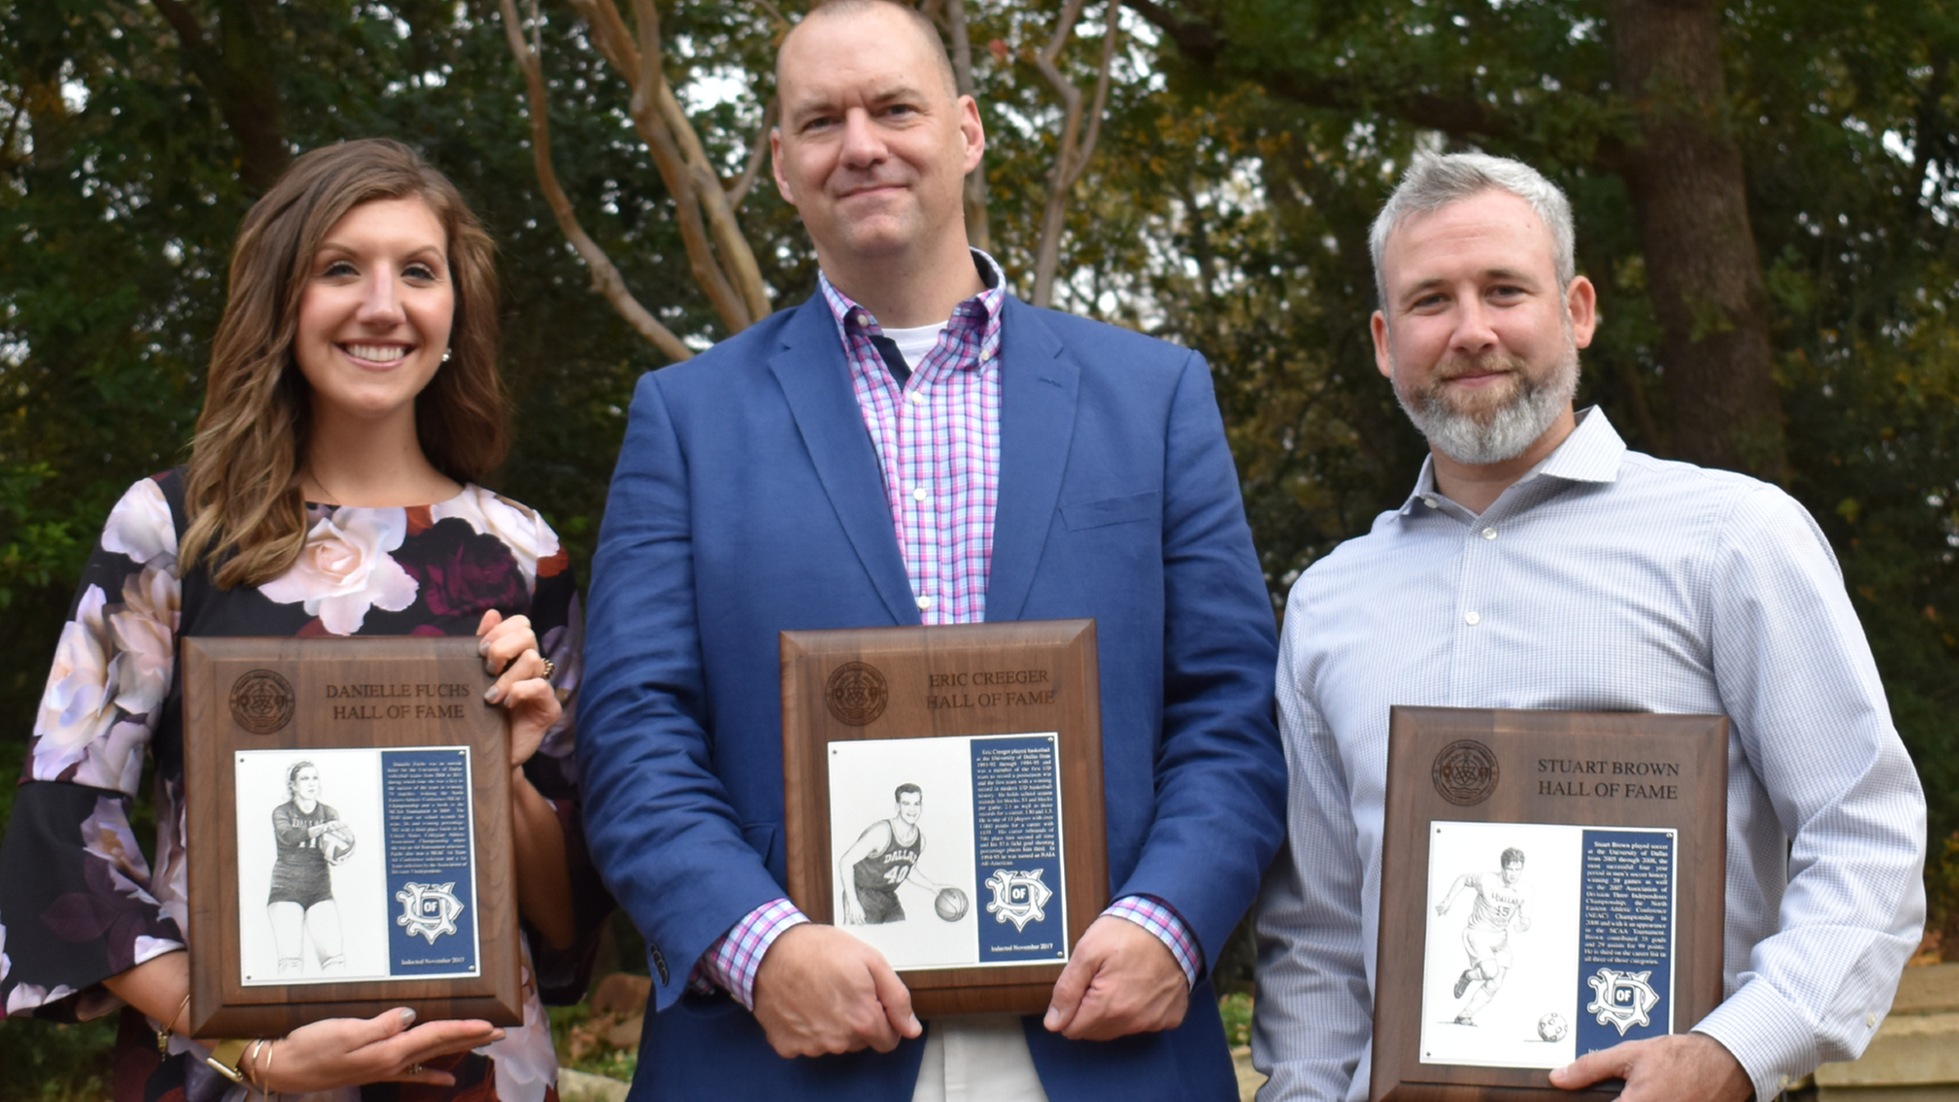 Three Former Crusaders Inducted into the 2017 Hall of Fame on Sunday